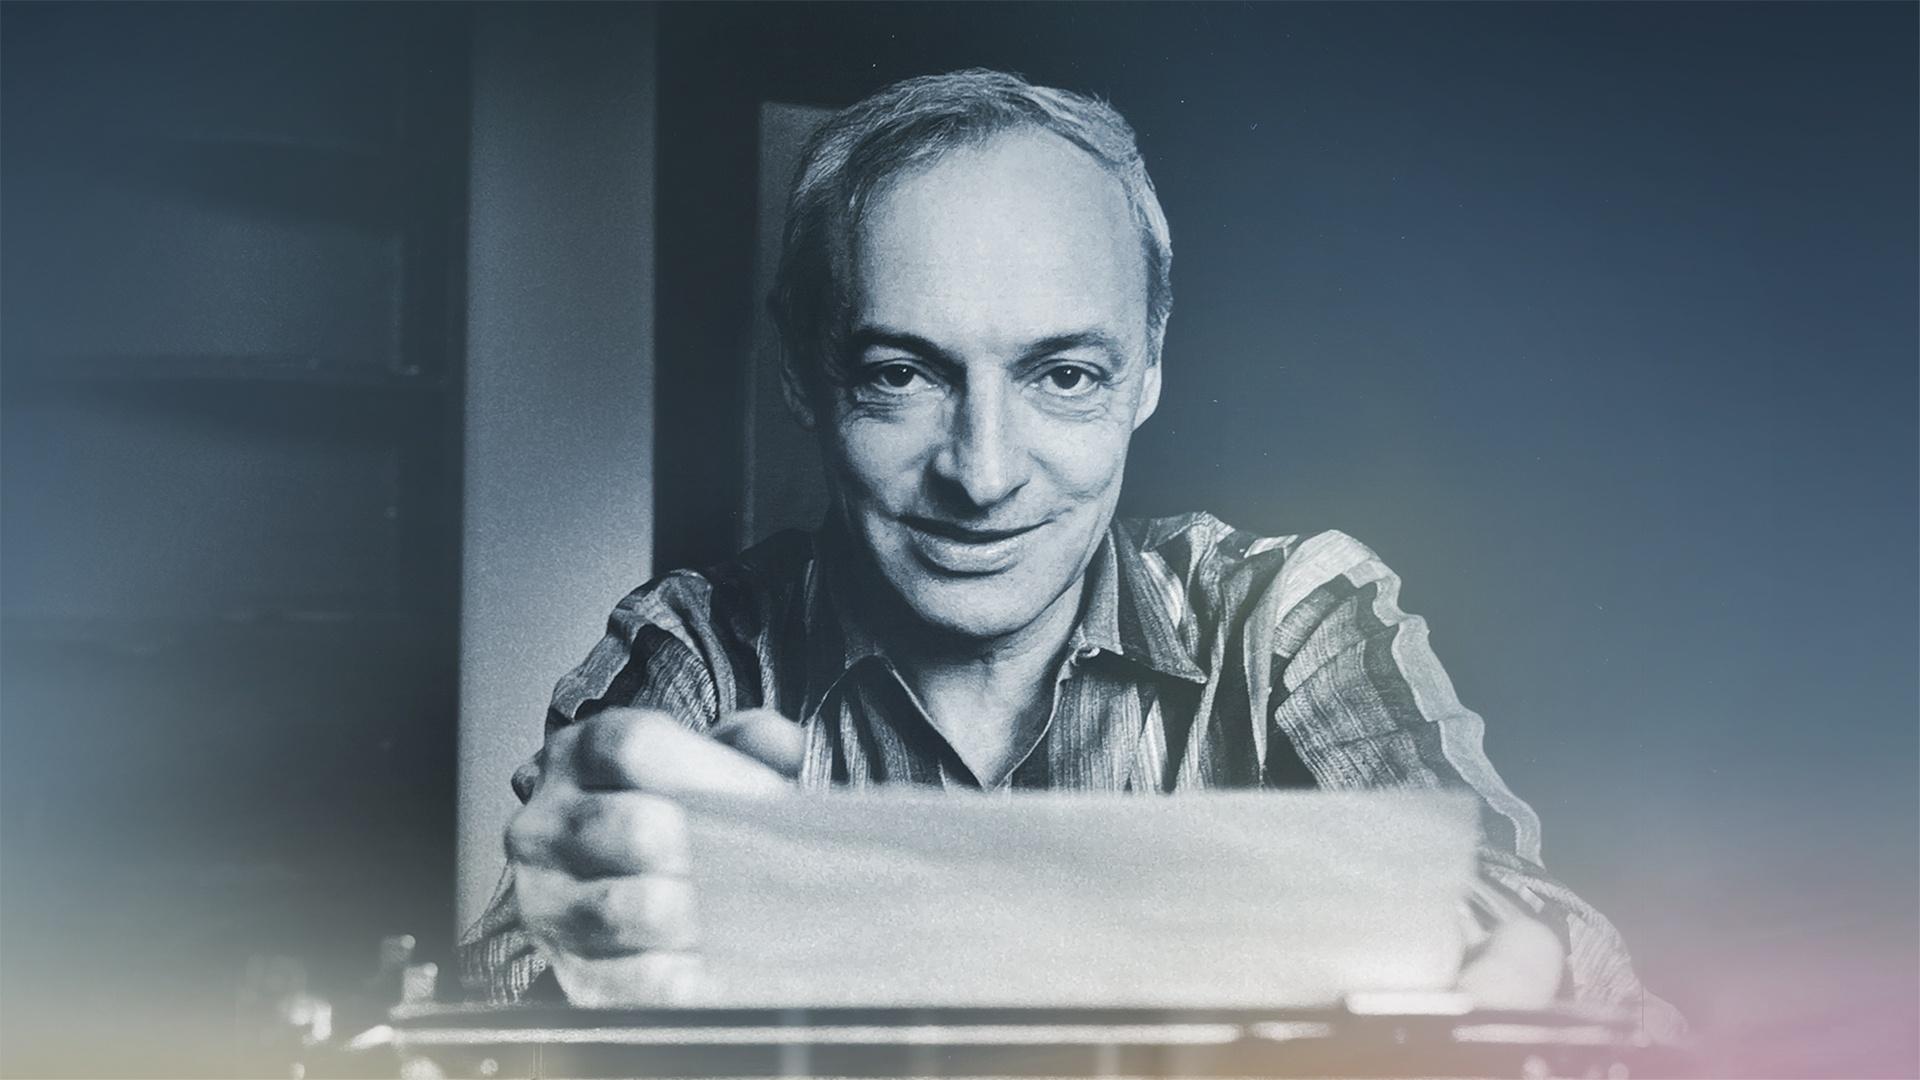 a portrait of saul bellow with his arms crossed in a plaid shirt